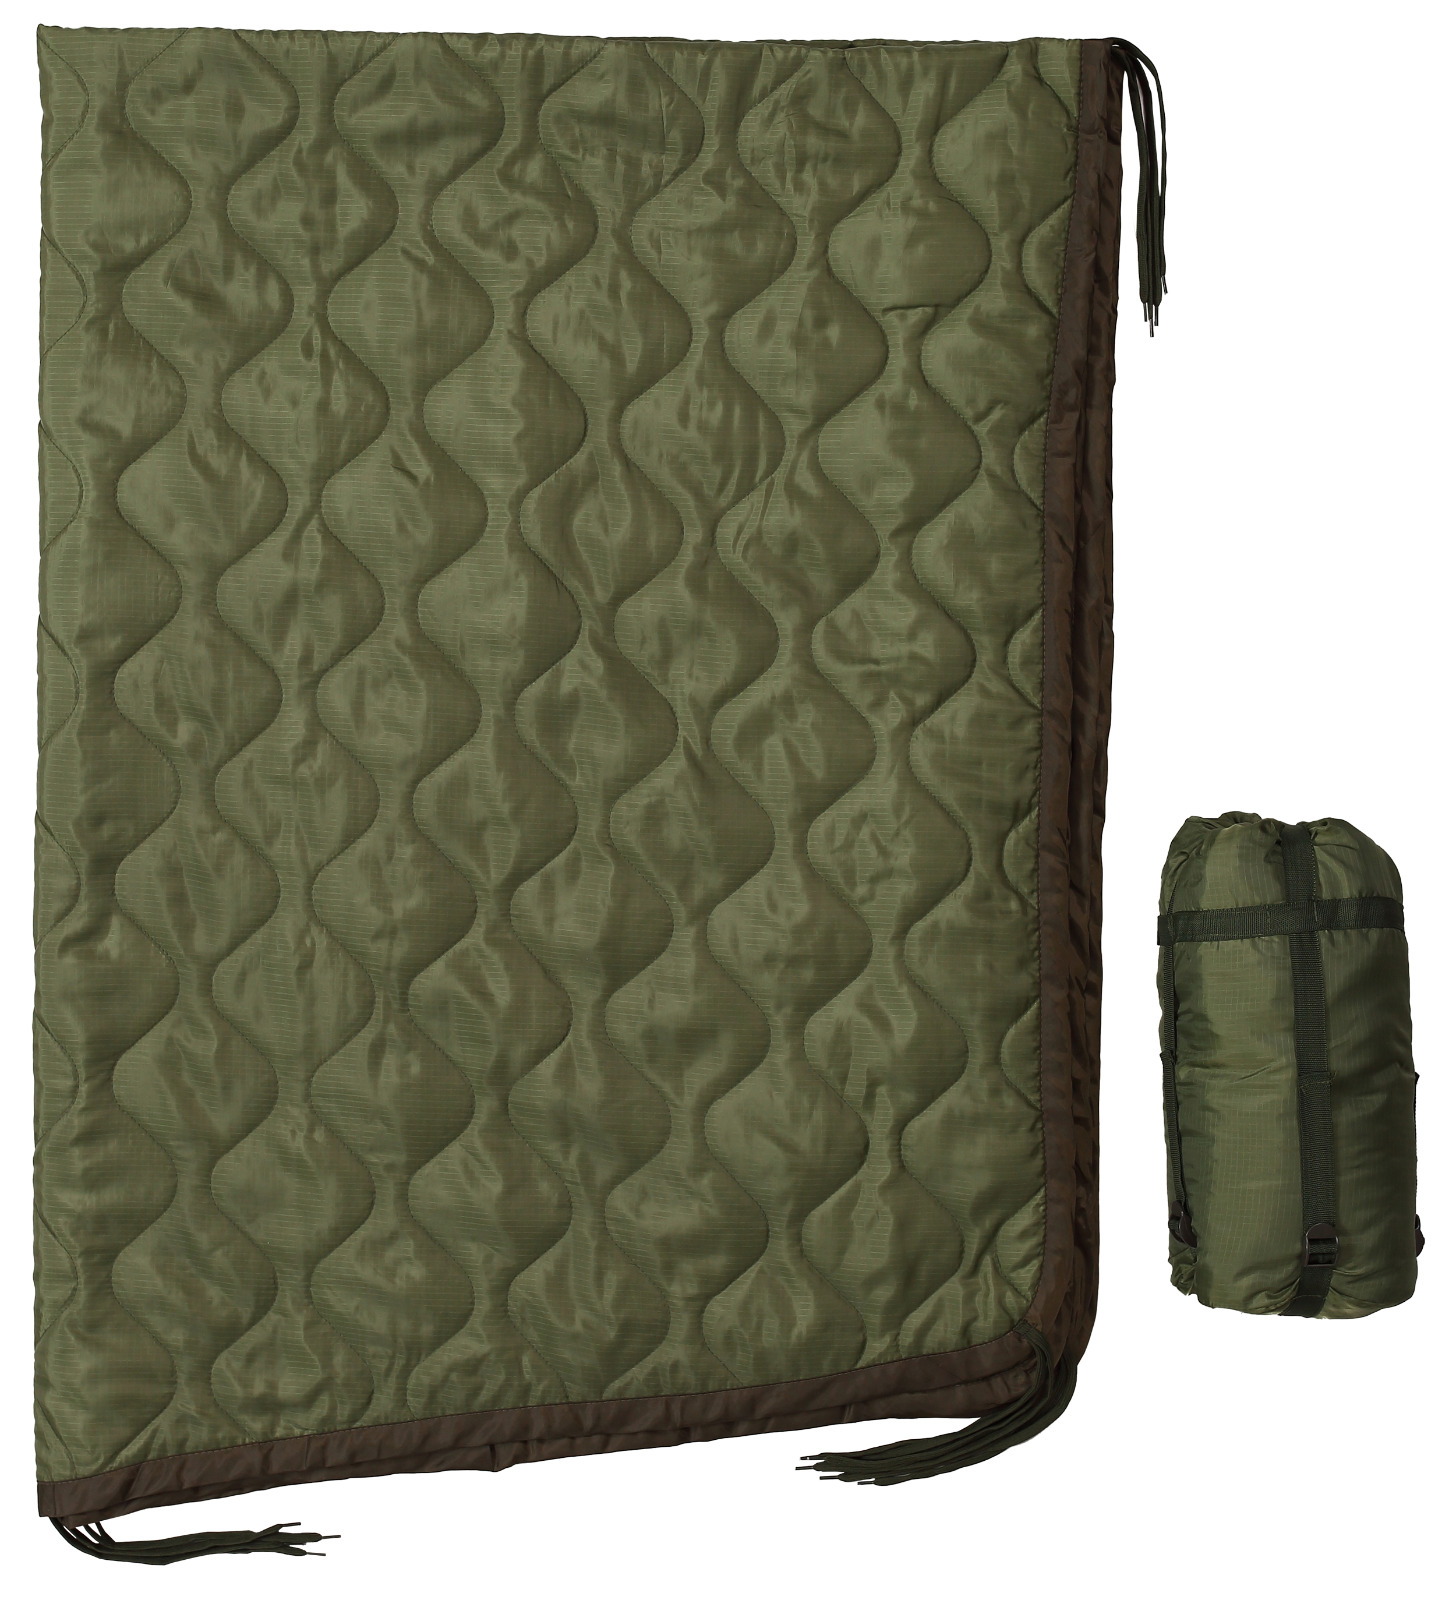 USGI Military Style All Weather Poncho Liner / Woobie Blanket in OD Green